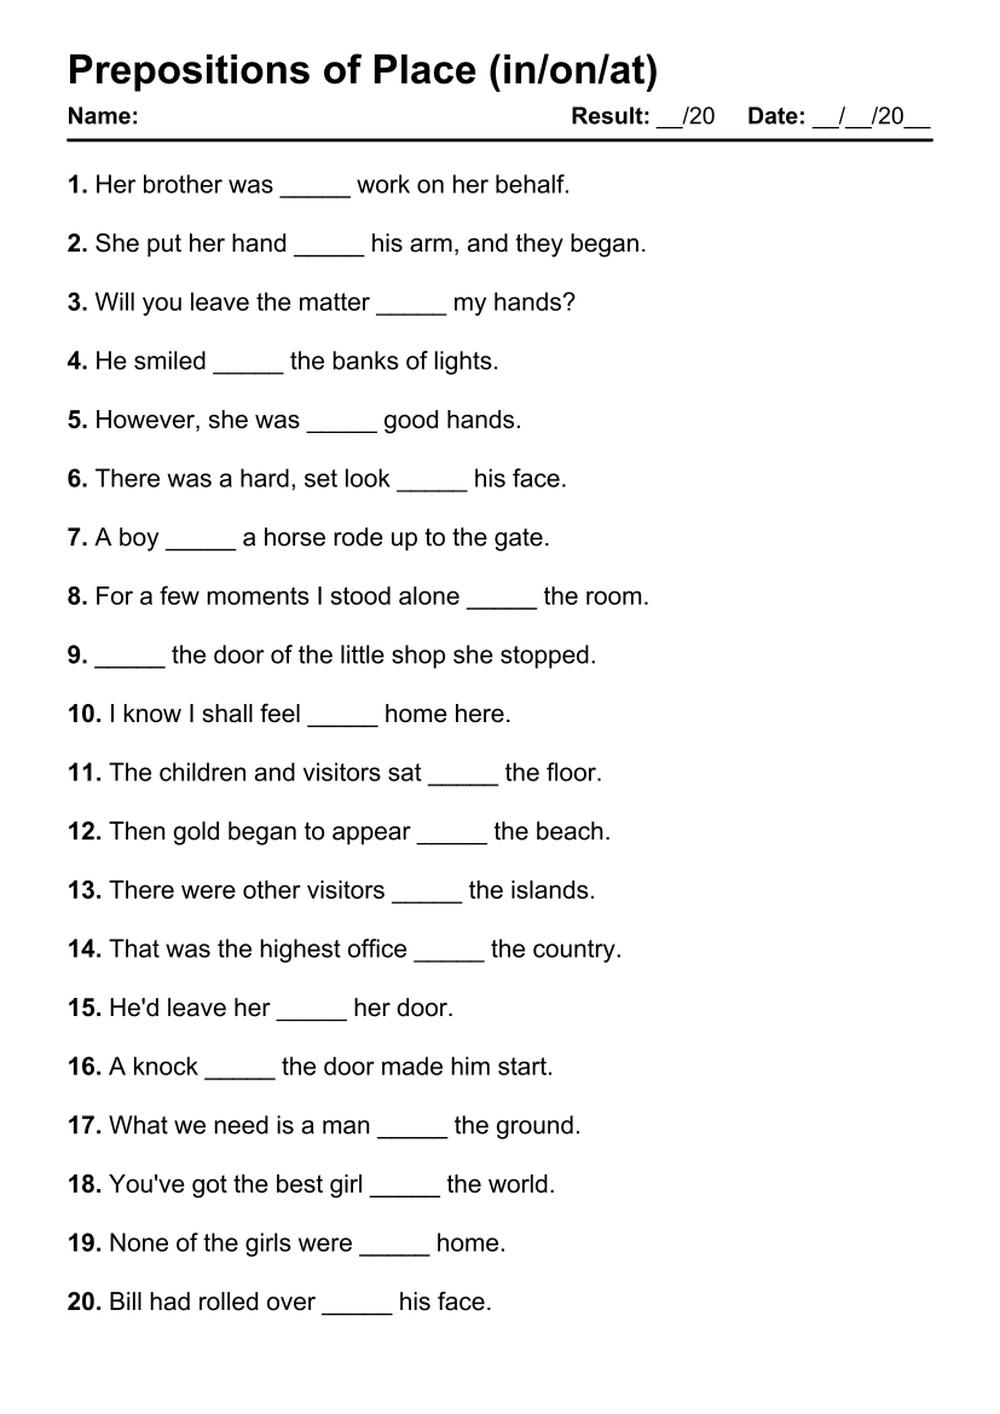 Printable Prepositions of Place Exercises - PDF Worksheet with Answers - Test 38